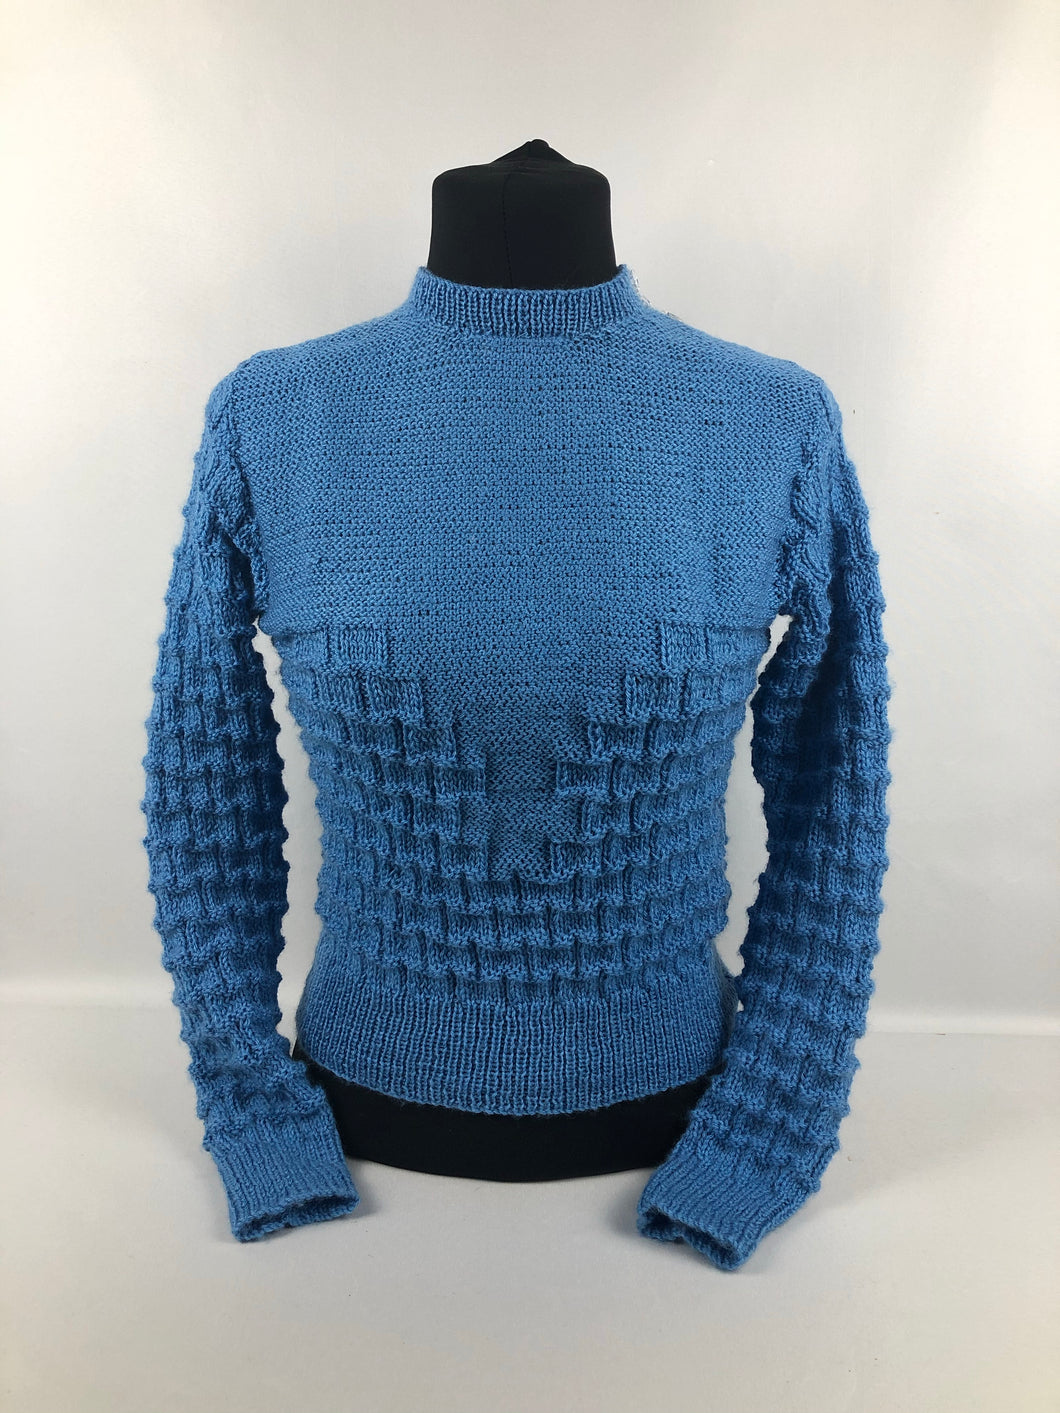 Reproduction 1930s Hand Knitted Jumper in Soft Blue - B35 38